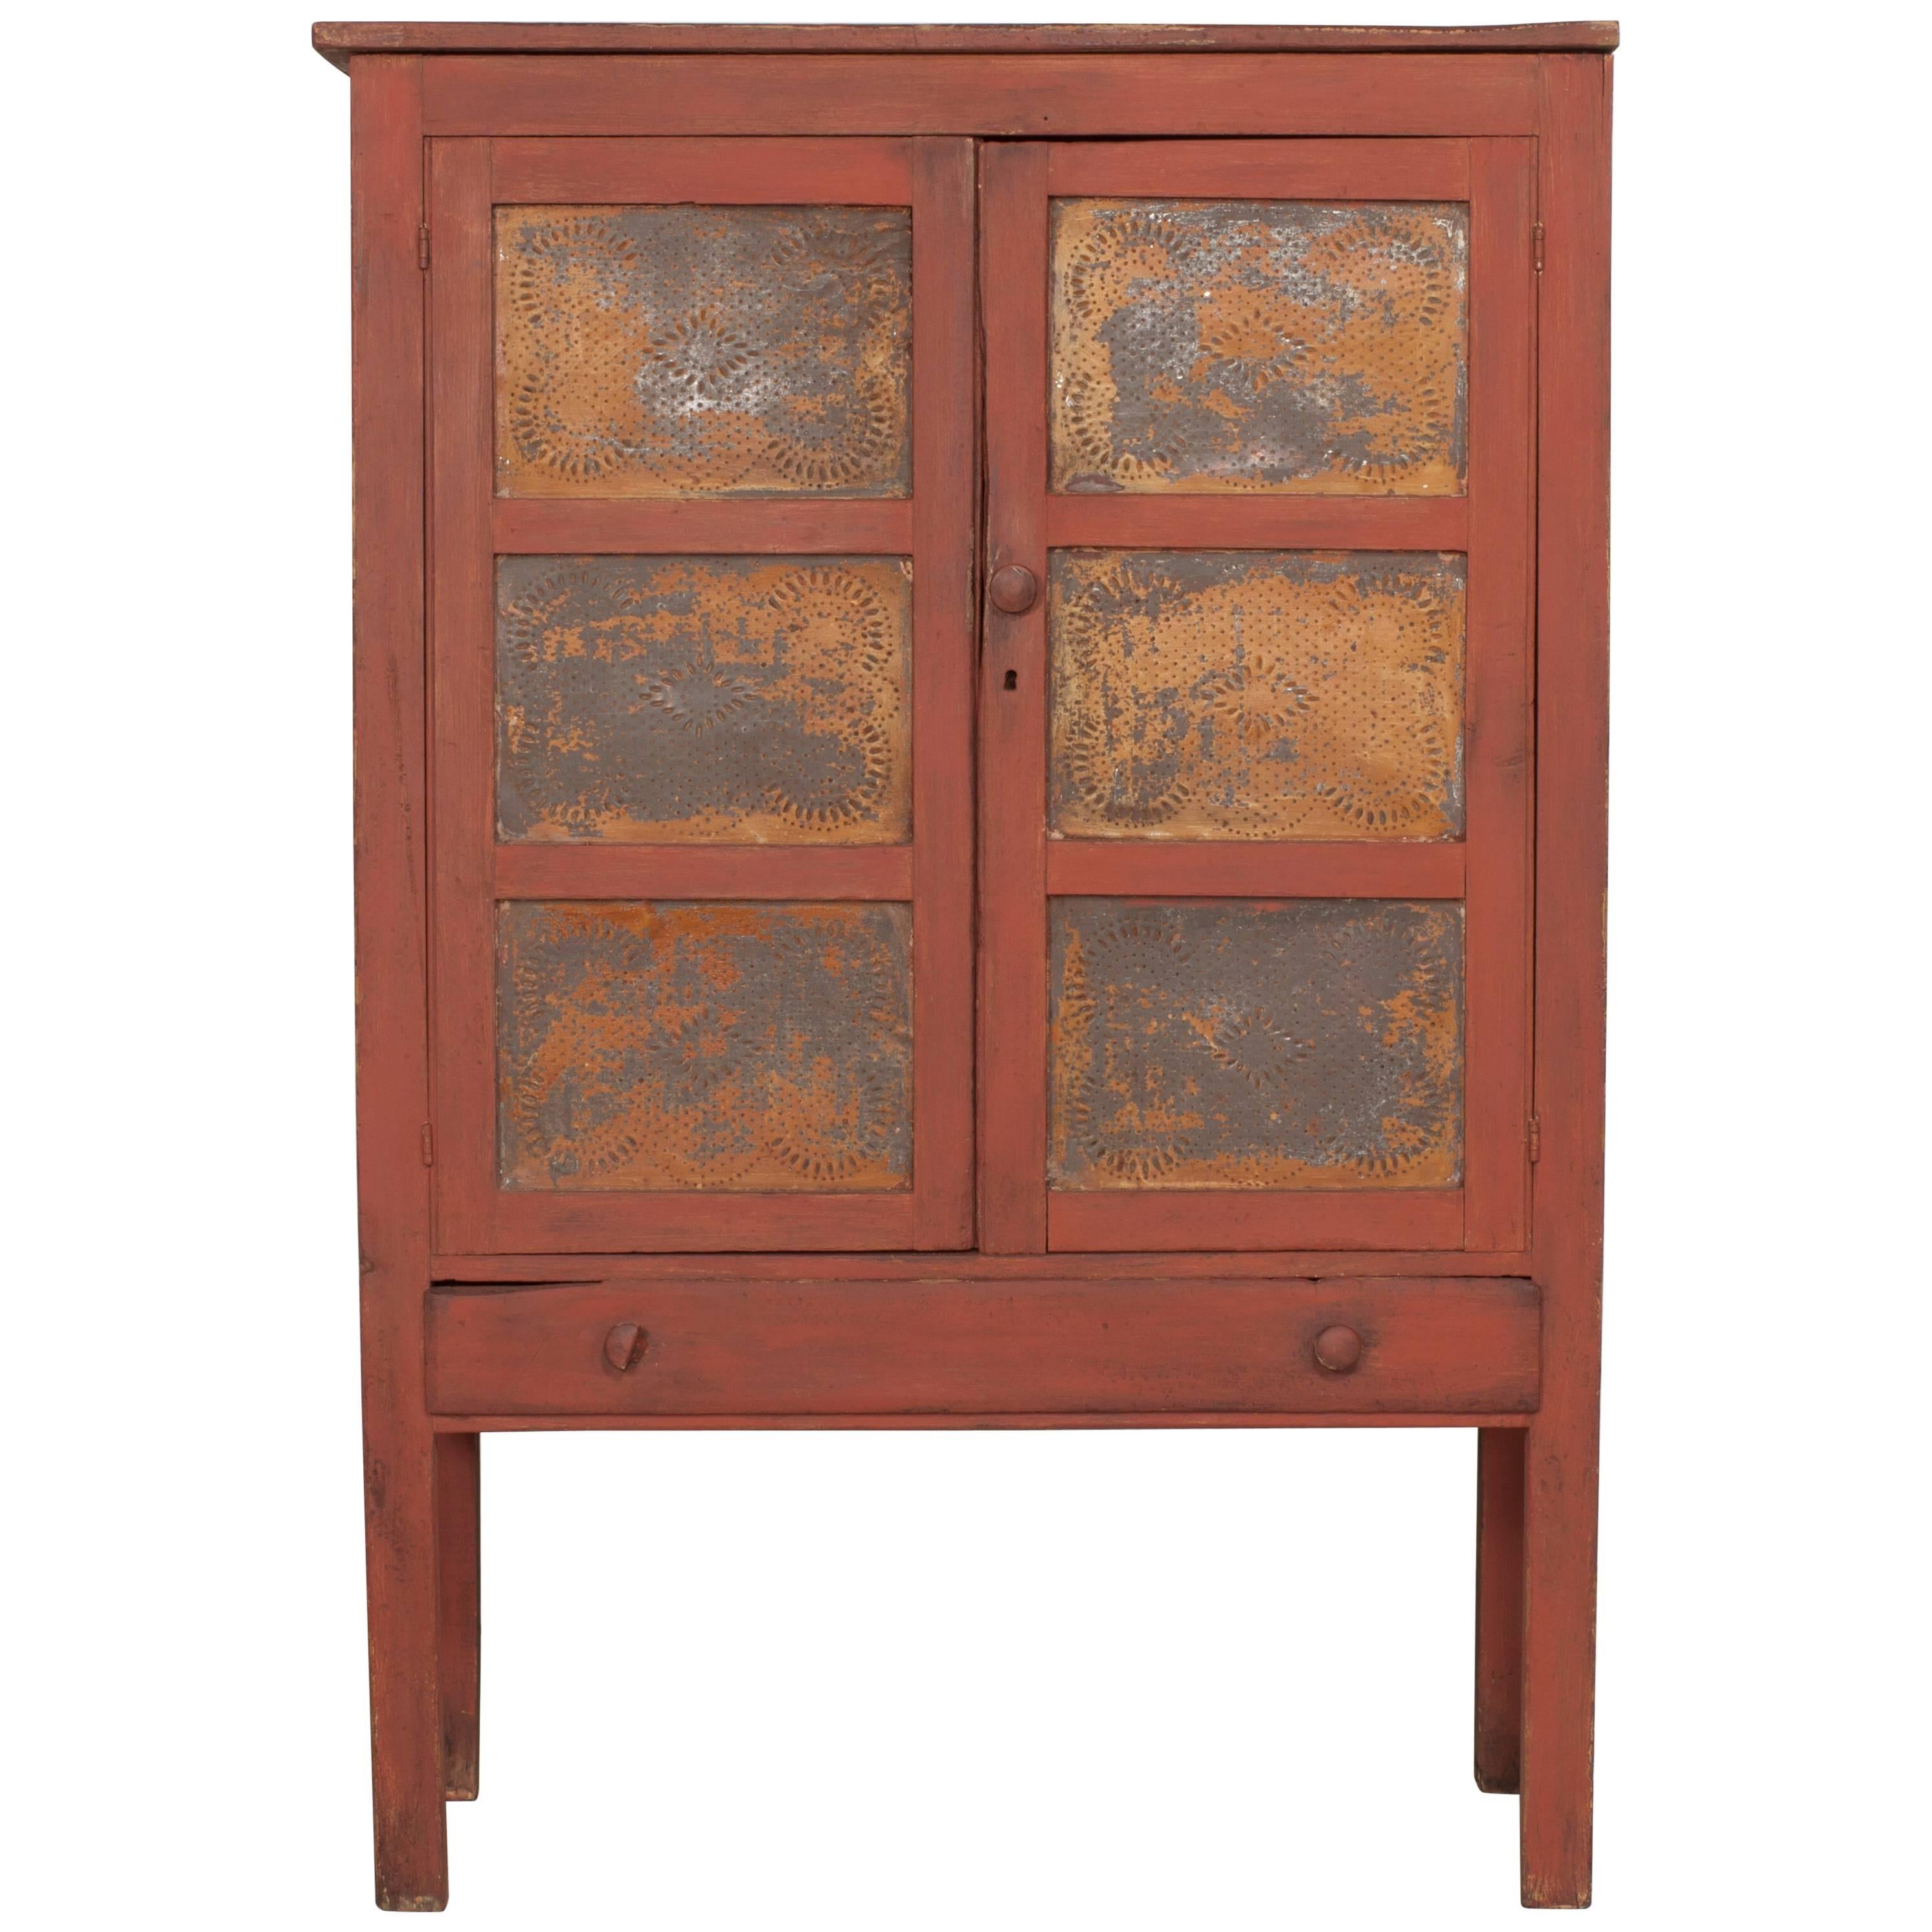 Early American Pie Safe Cabinet with Patina Metal Details and Single Drawer